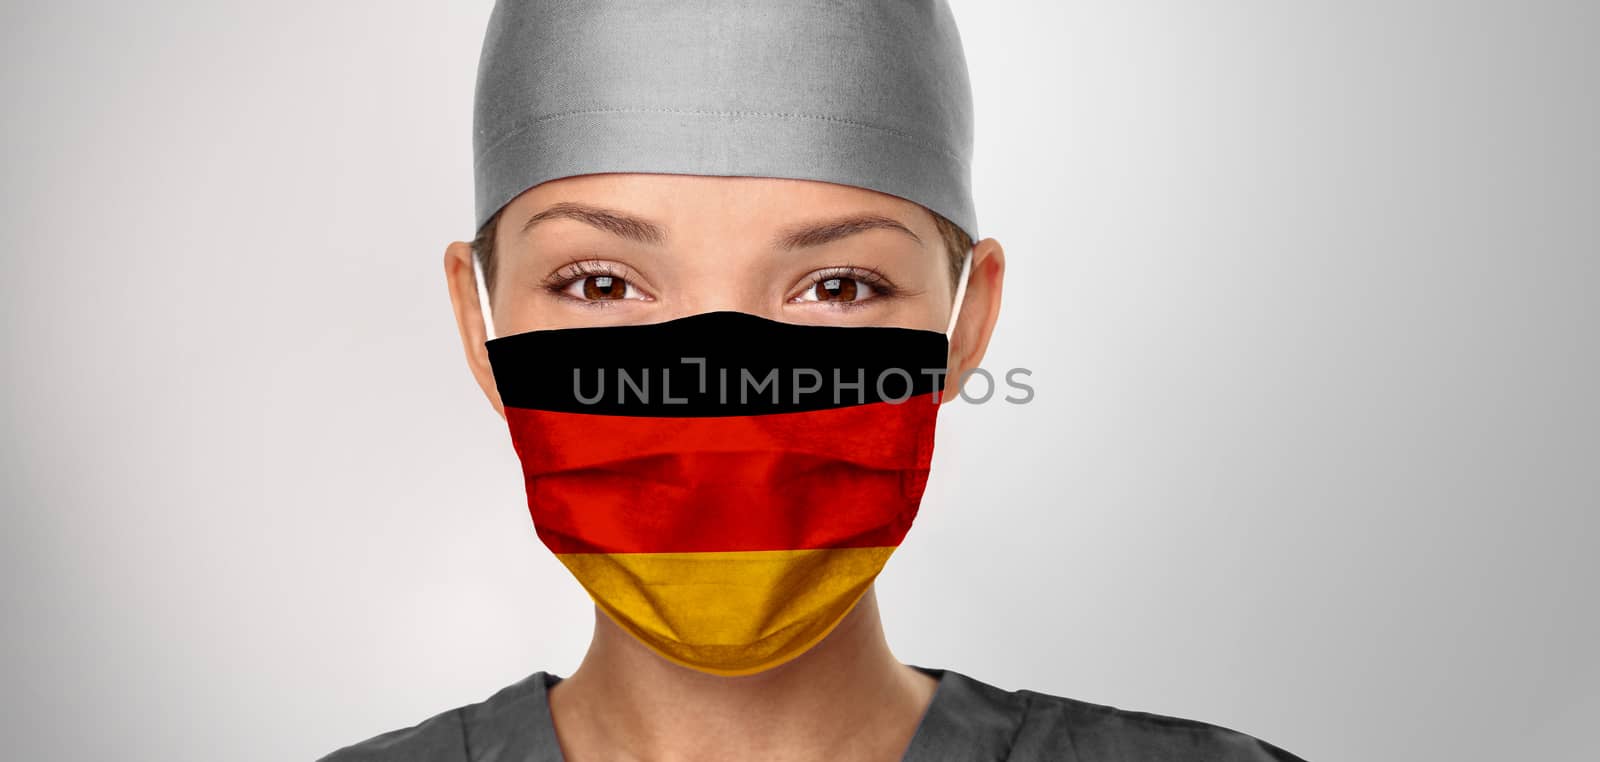 German flag on Asian doctor woman wearing mask. COVID-19 outbreak in Germany. Graphic design illustration print on medical PPE by Maridav